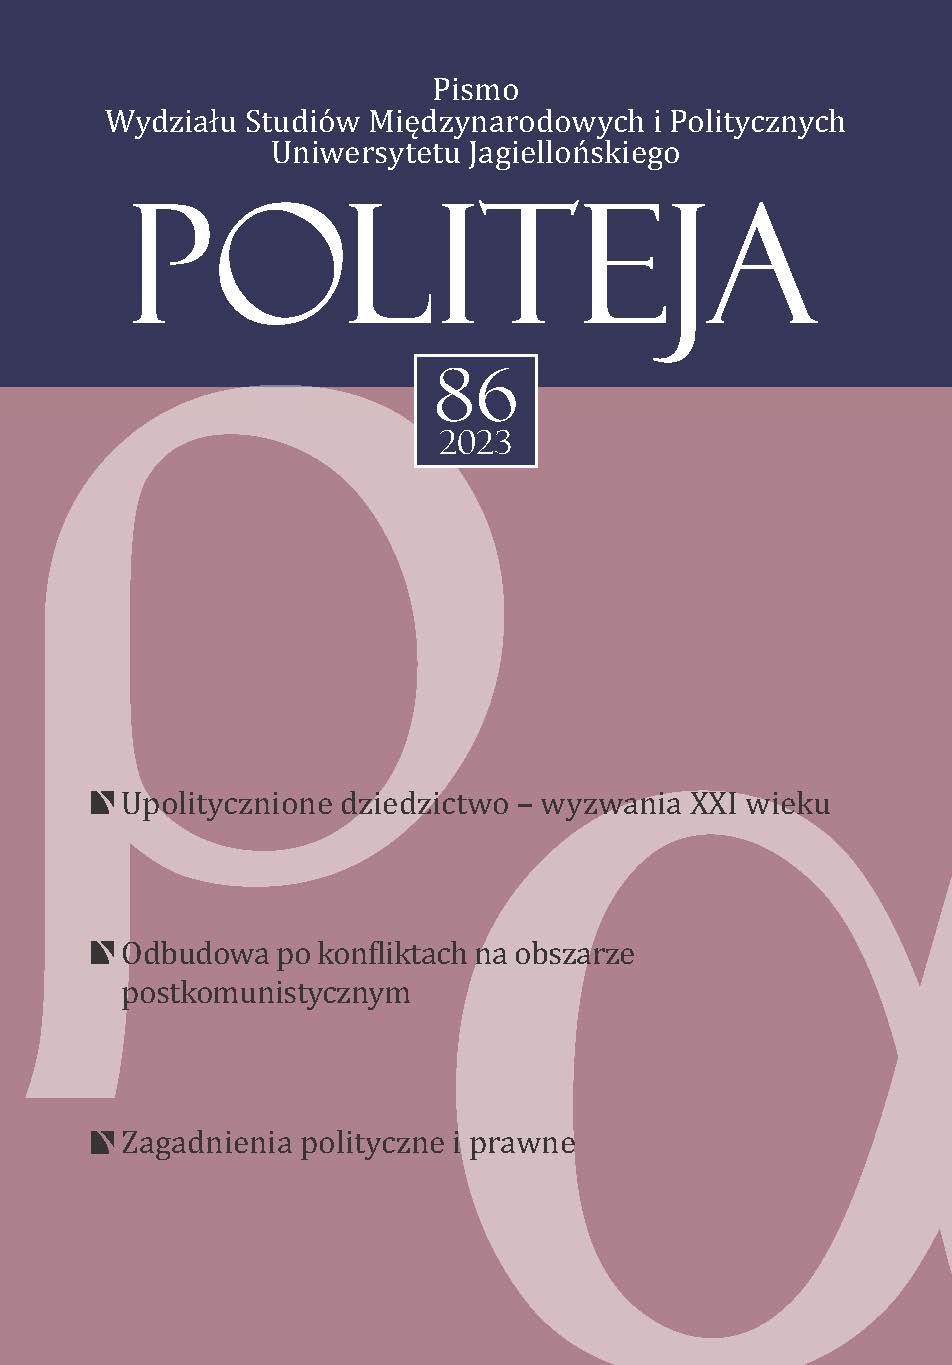 Historical Discourses of the Baltic States as an Instrument for the Protection of Young Democracies After the Collapse of the USSR Cover Image